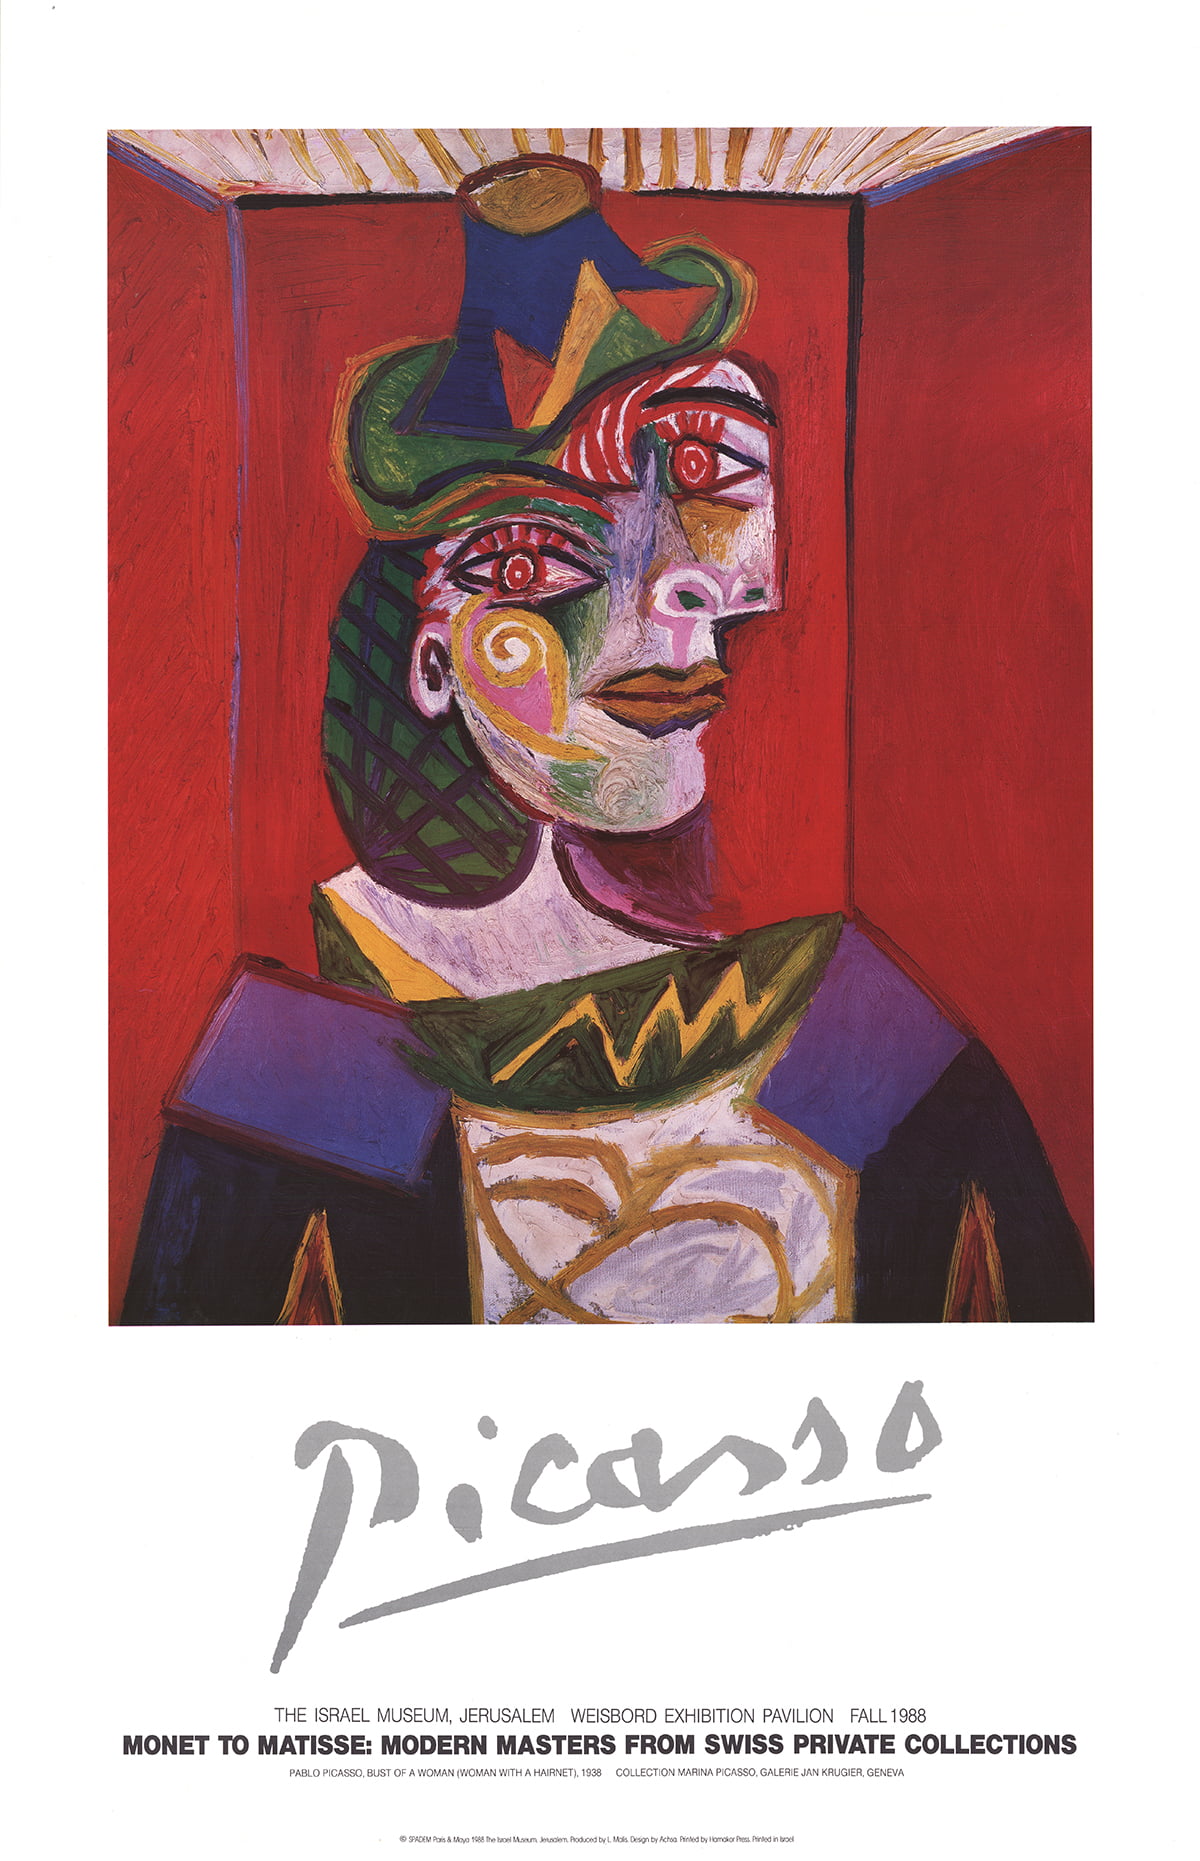 karton tang fred Pablo Picasso-Bust of a Woman (Woman with a Hairnet)-1988 Poster -  Walmart.com